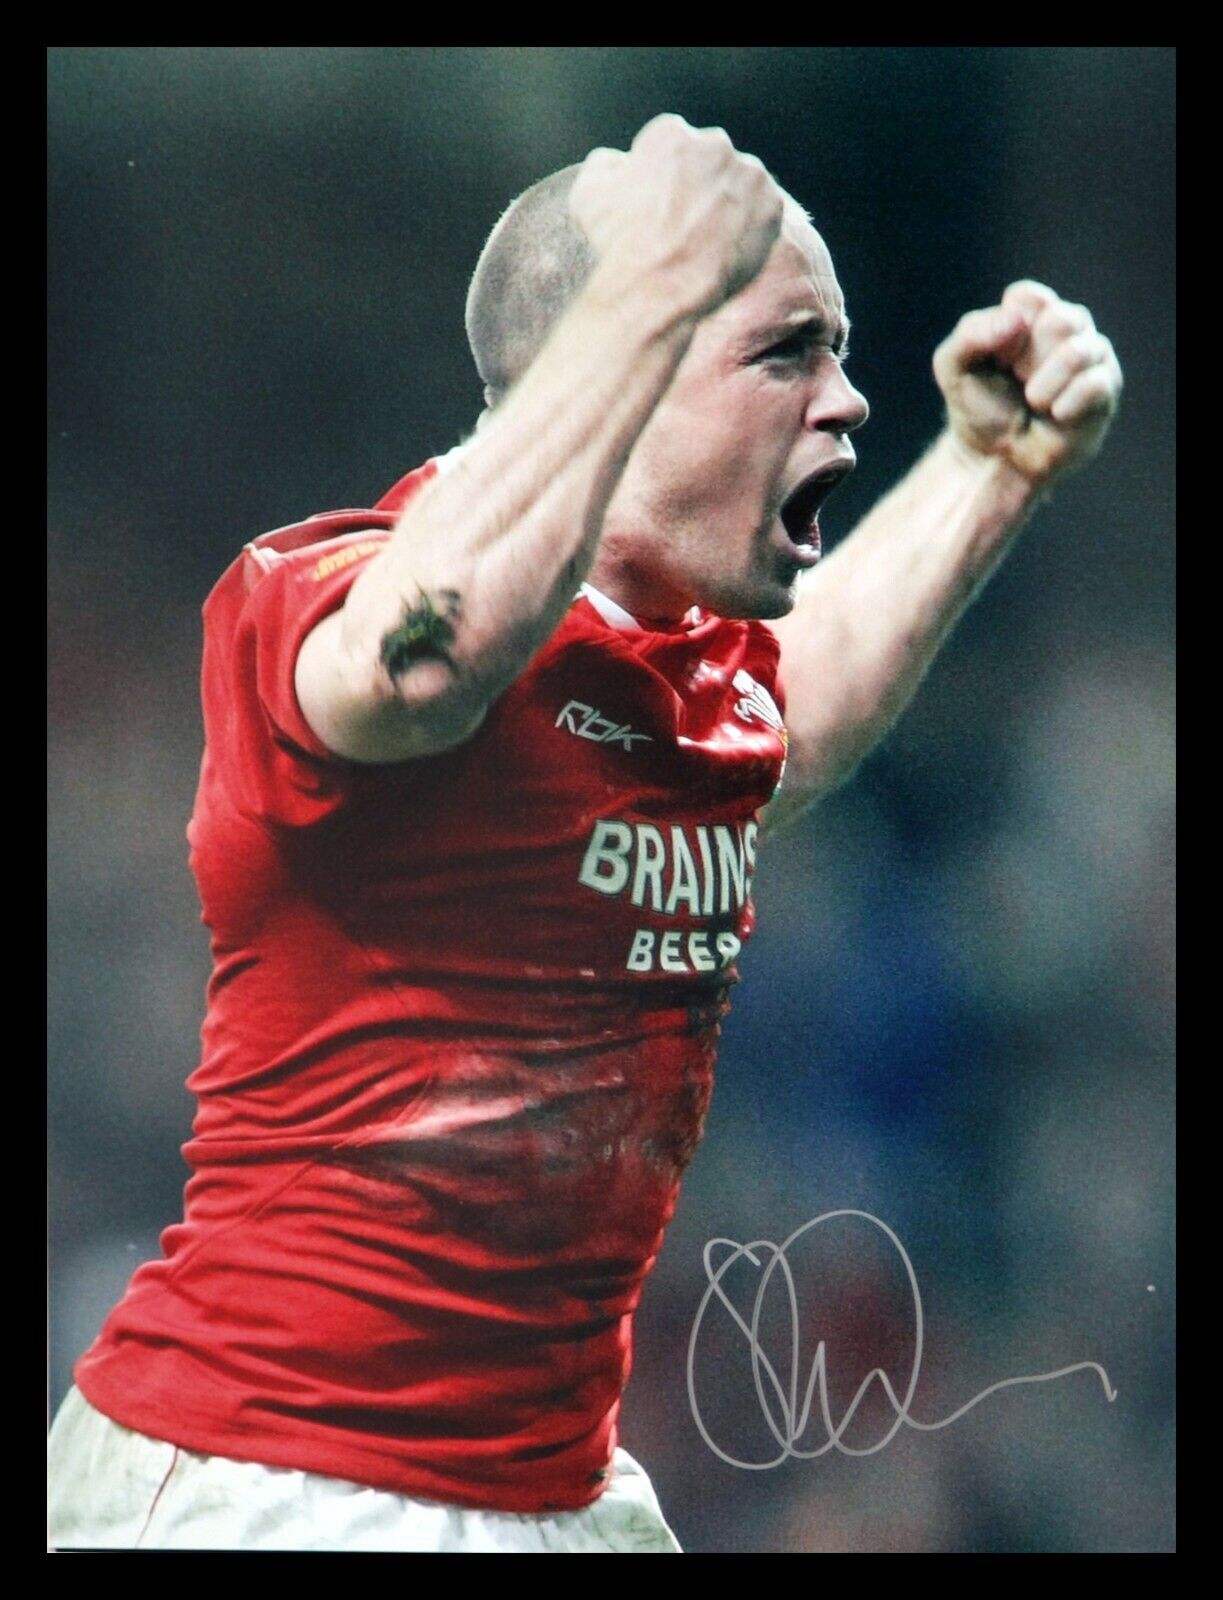 Shane Williams Signed Rugby 12x16 Photograph: C